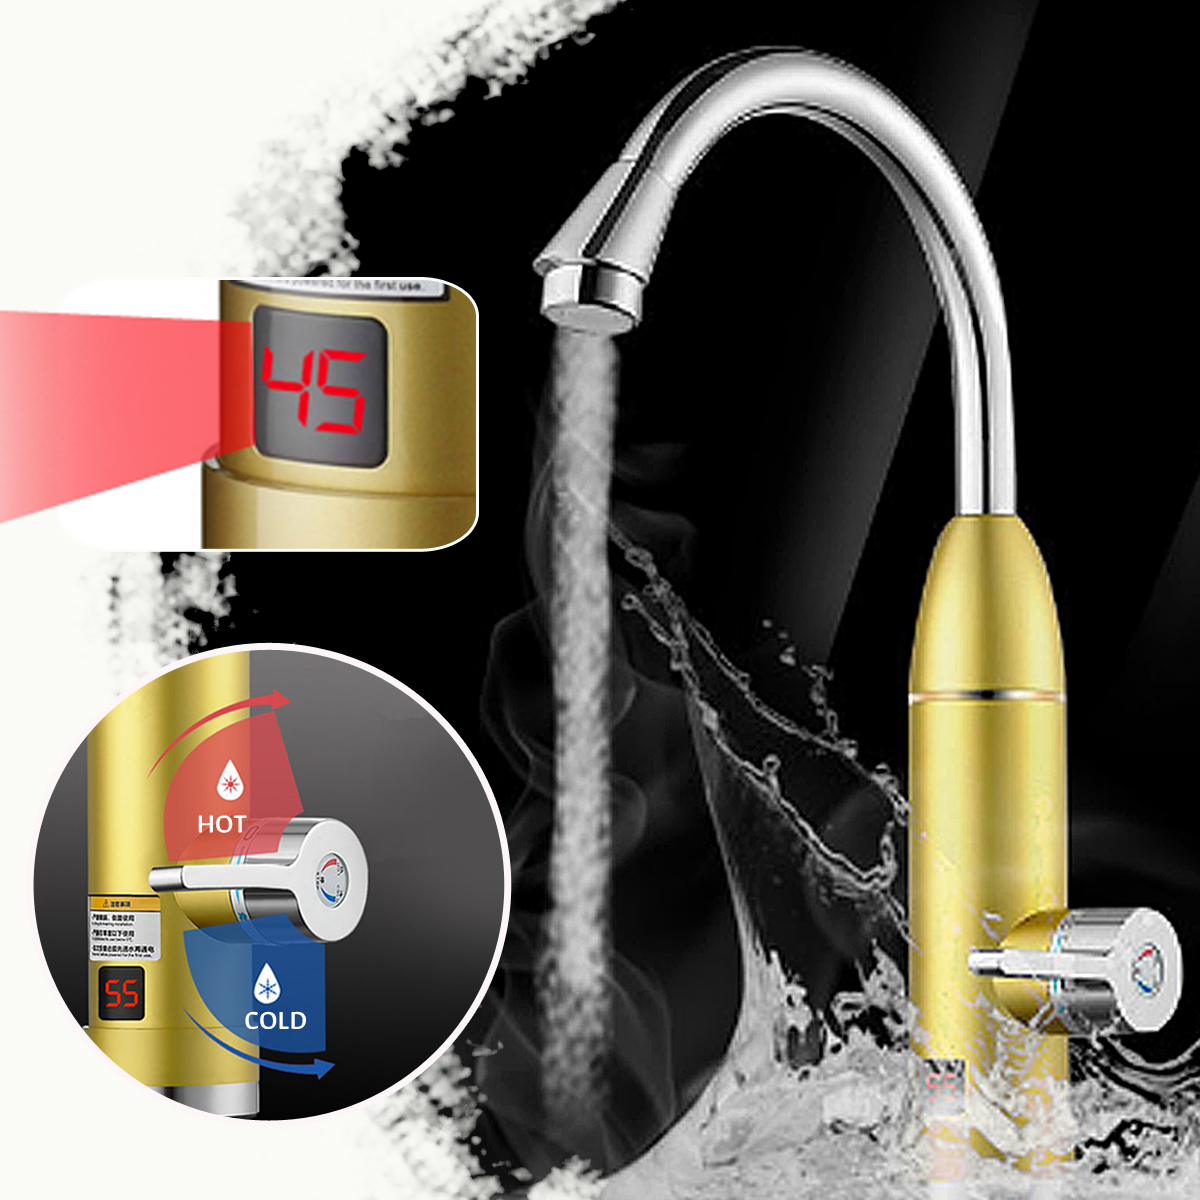 220V-3000W-Instant-Electric-Tankless-ColdHot-Water-Heater-Shower-System-Tap-Faucet-Digital-Display-1332103